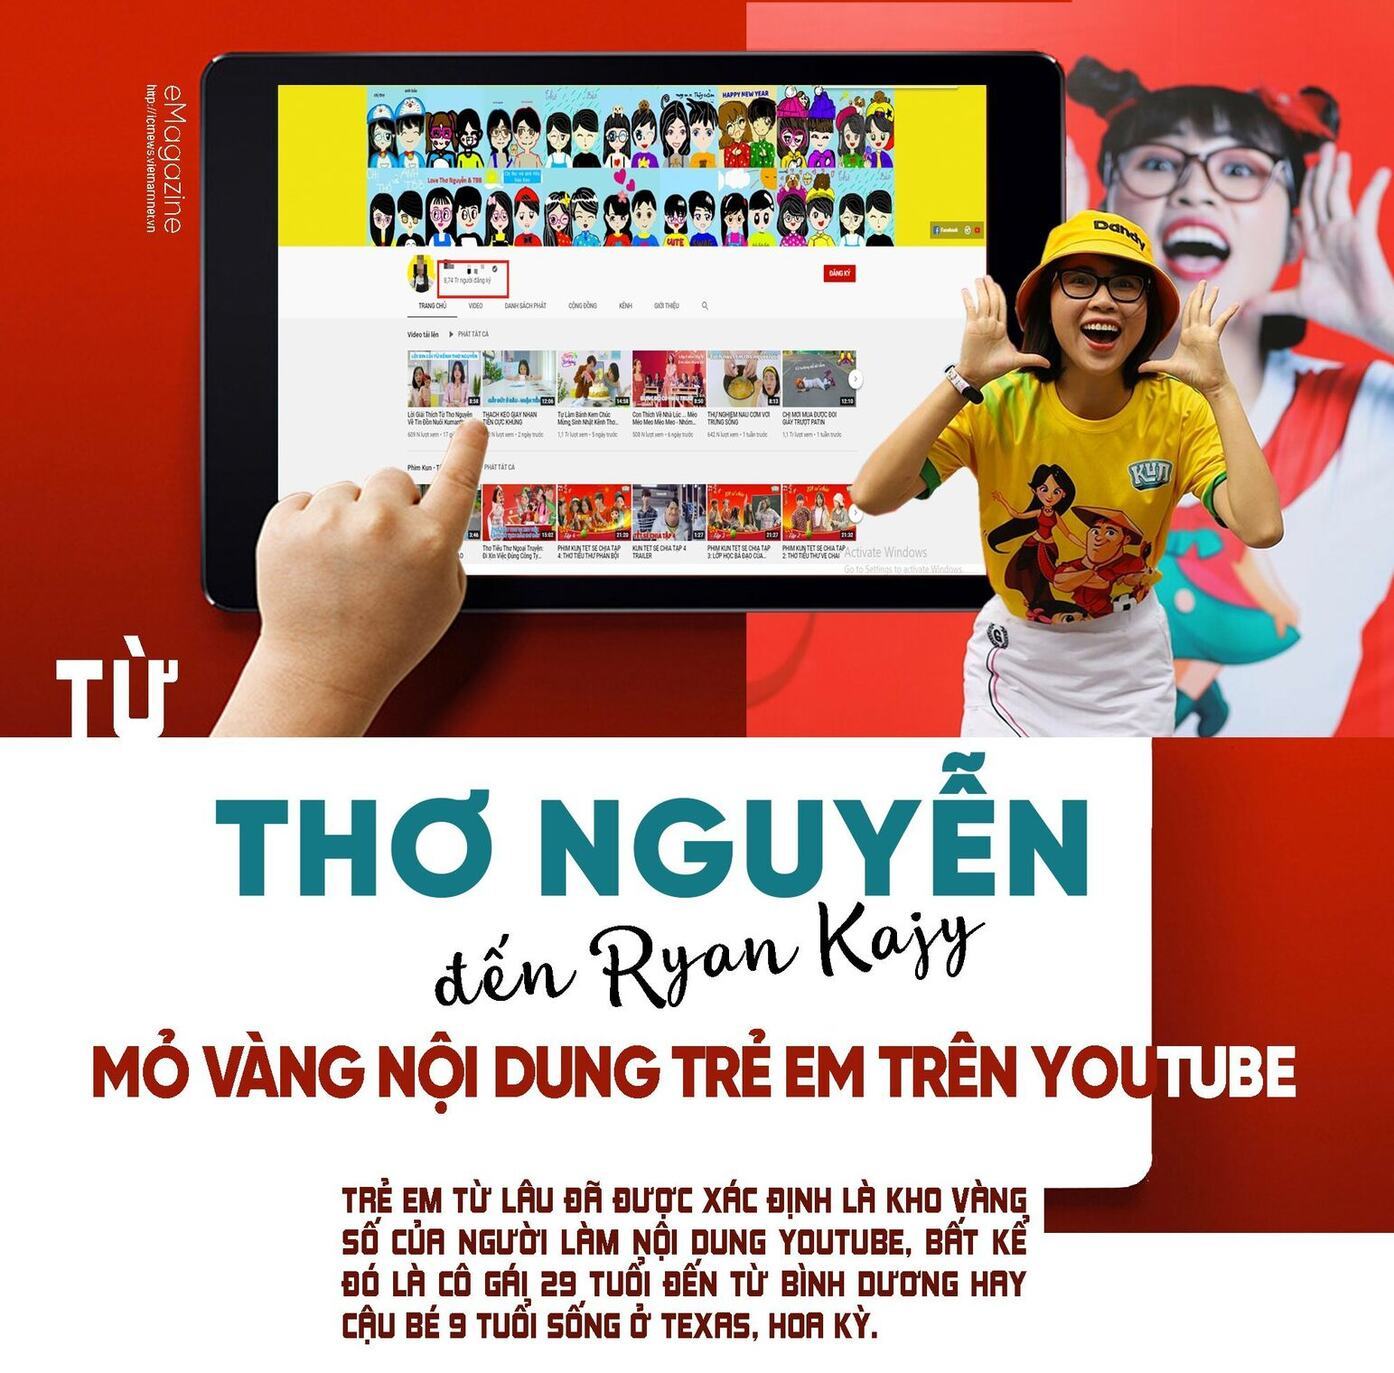 From Tho Nguyen to Ryan Kazy: high profits are made from YouTube content for children